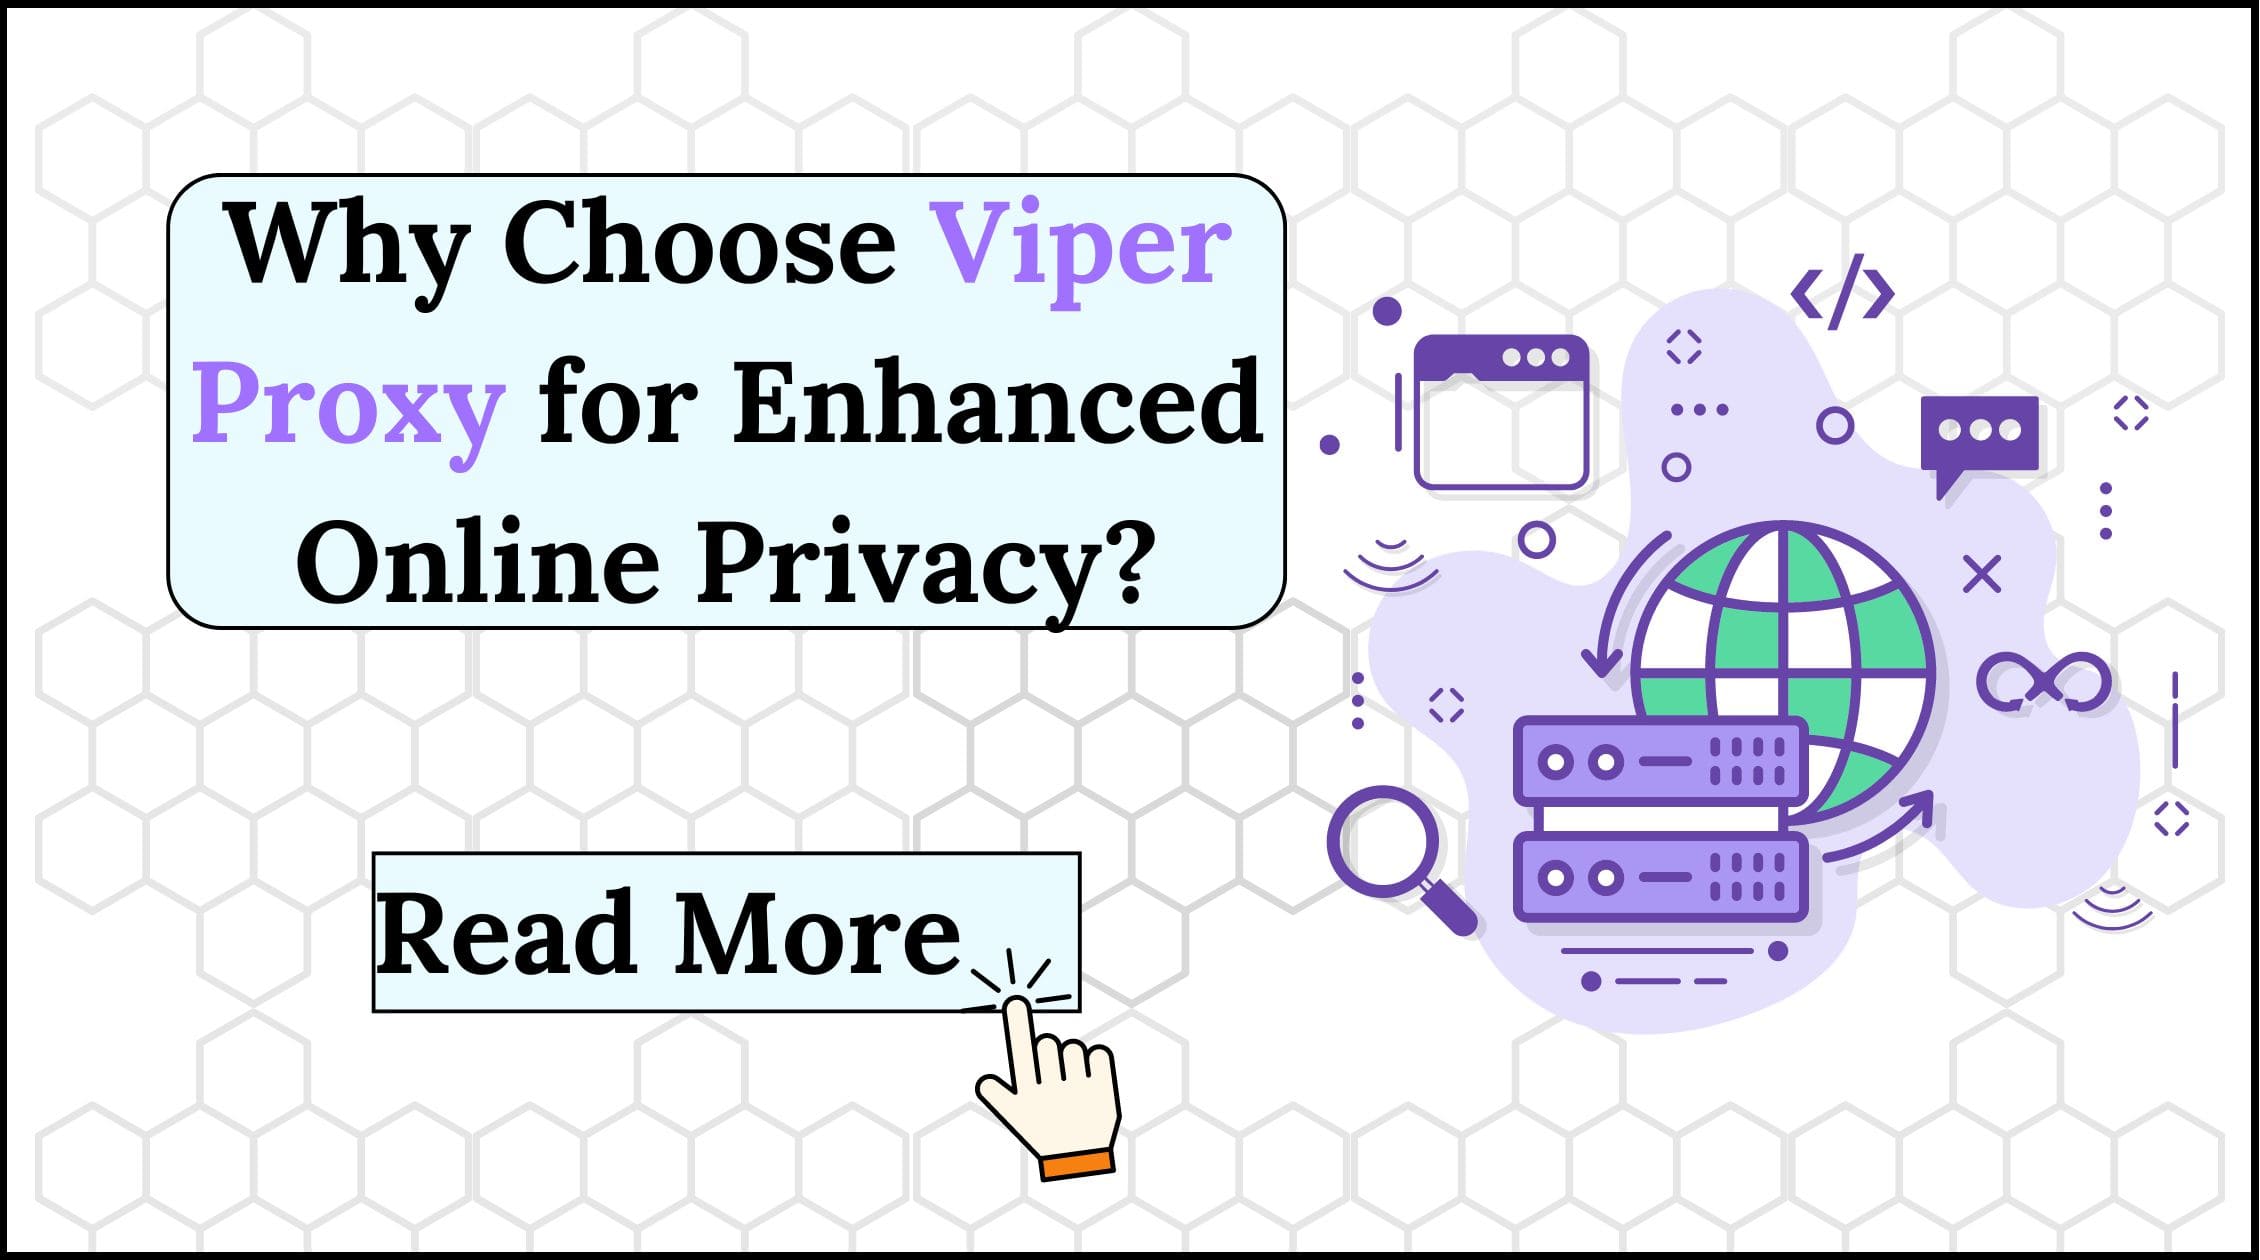 Why Choose Viper Proxy for Enhanced Online Privacy?